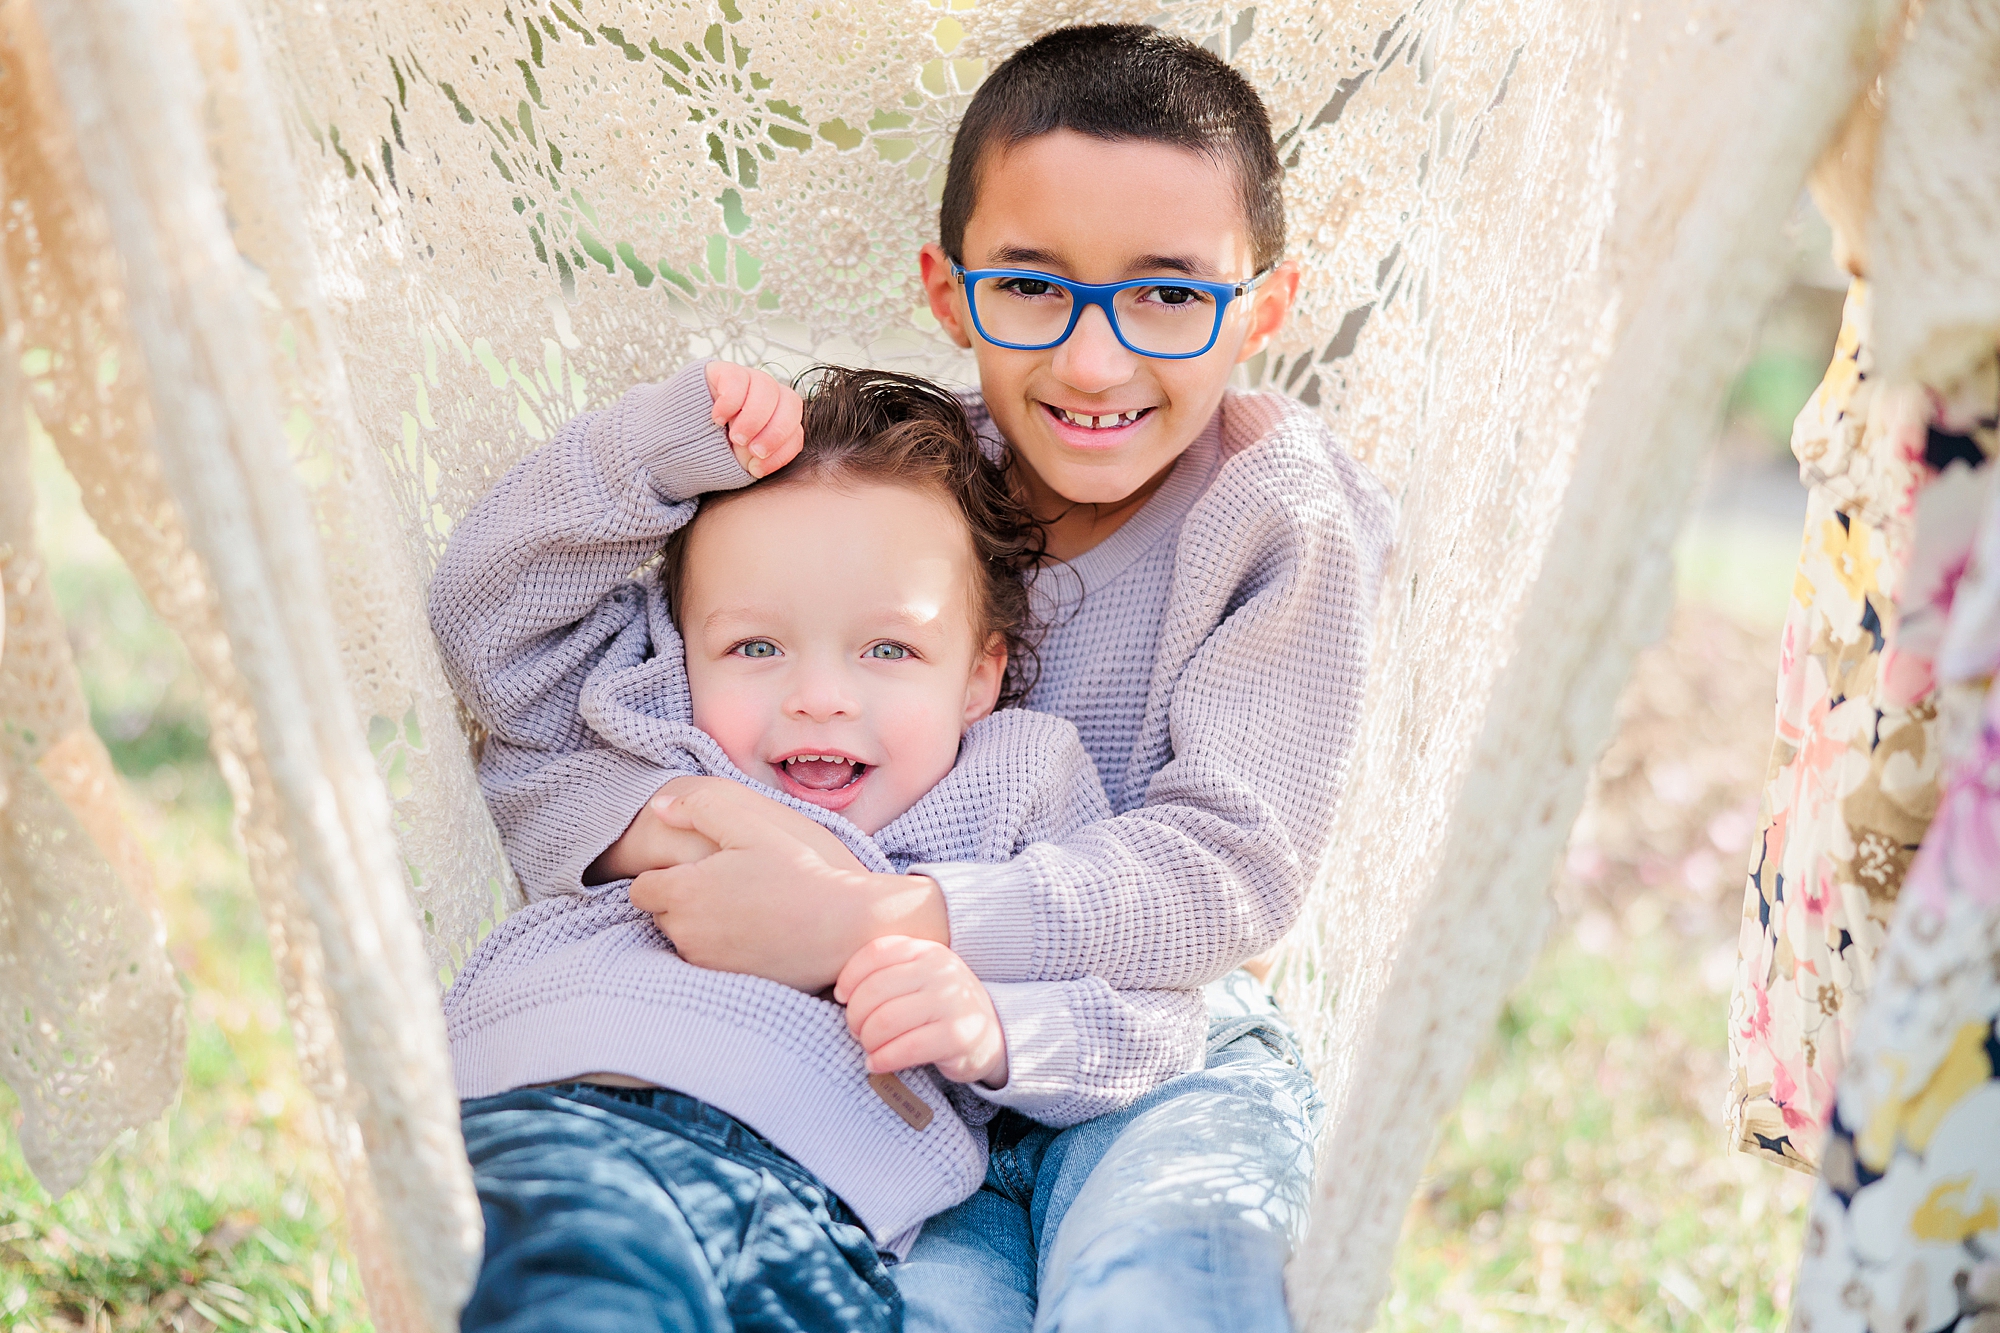 DMV family photographer shares why photography permits are important when planning your family photos - and what they mean!